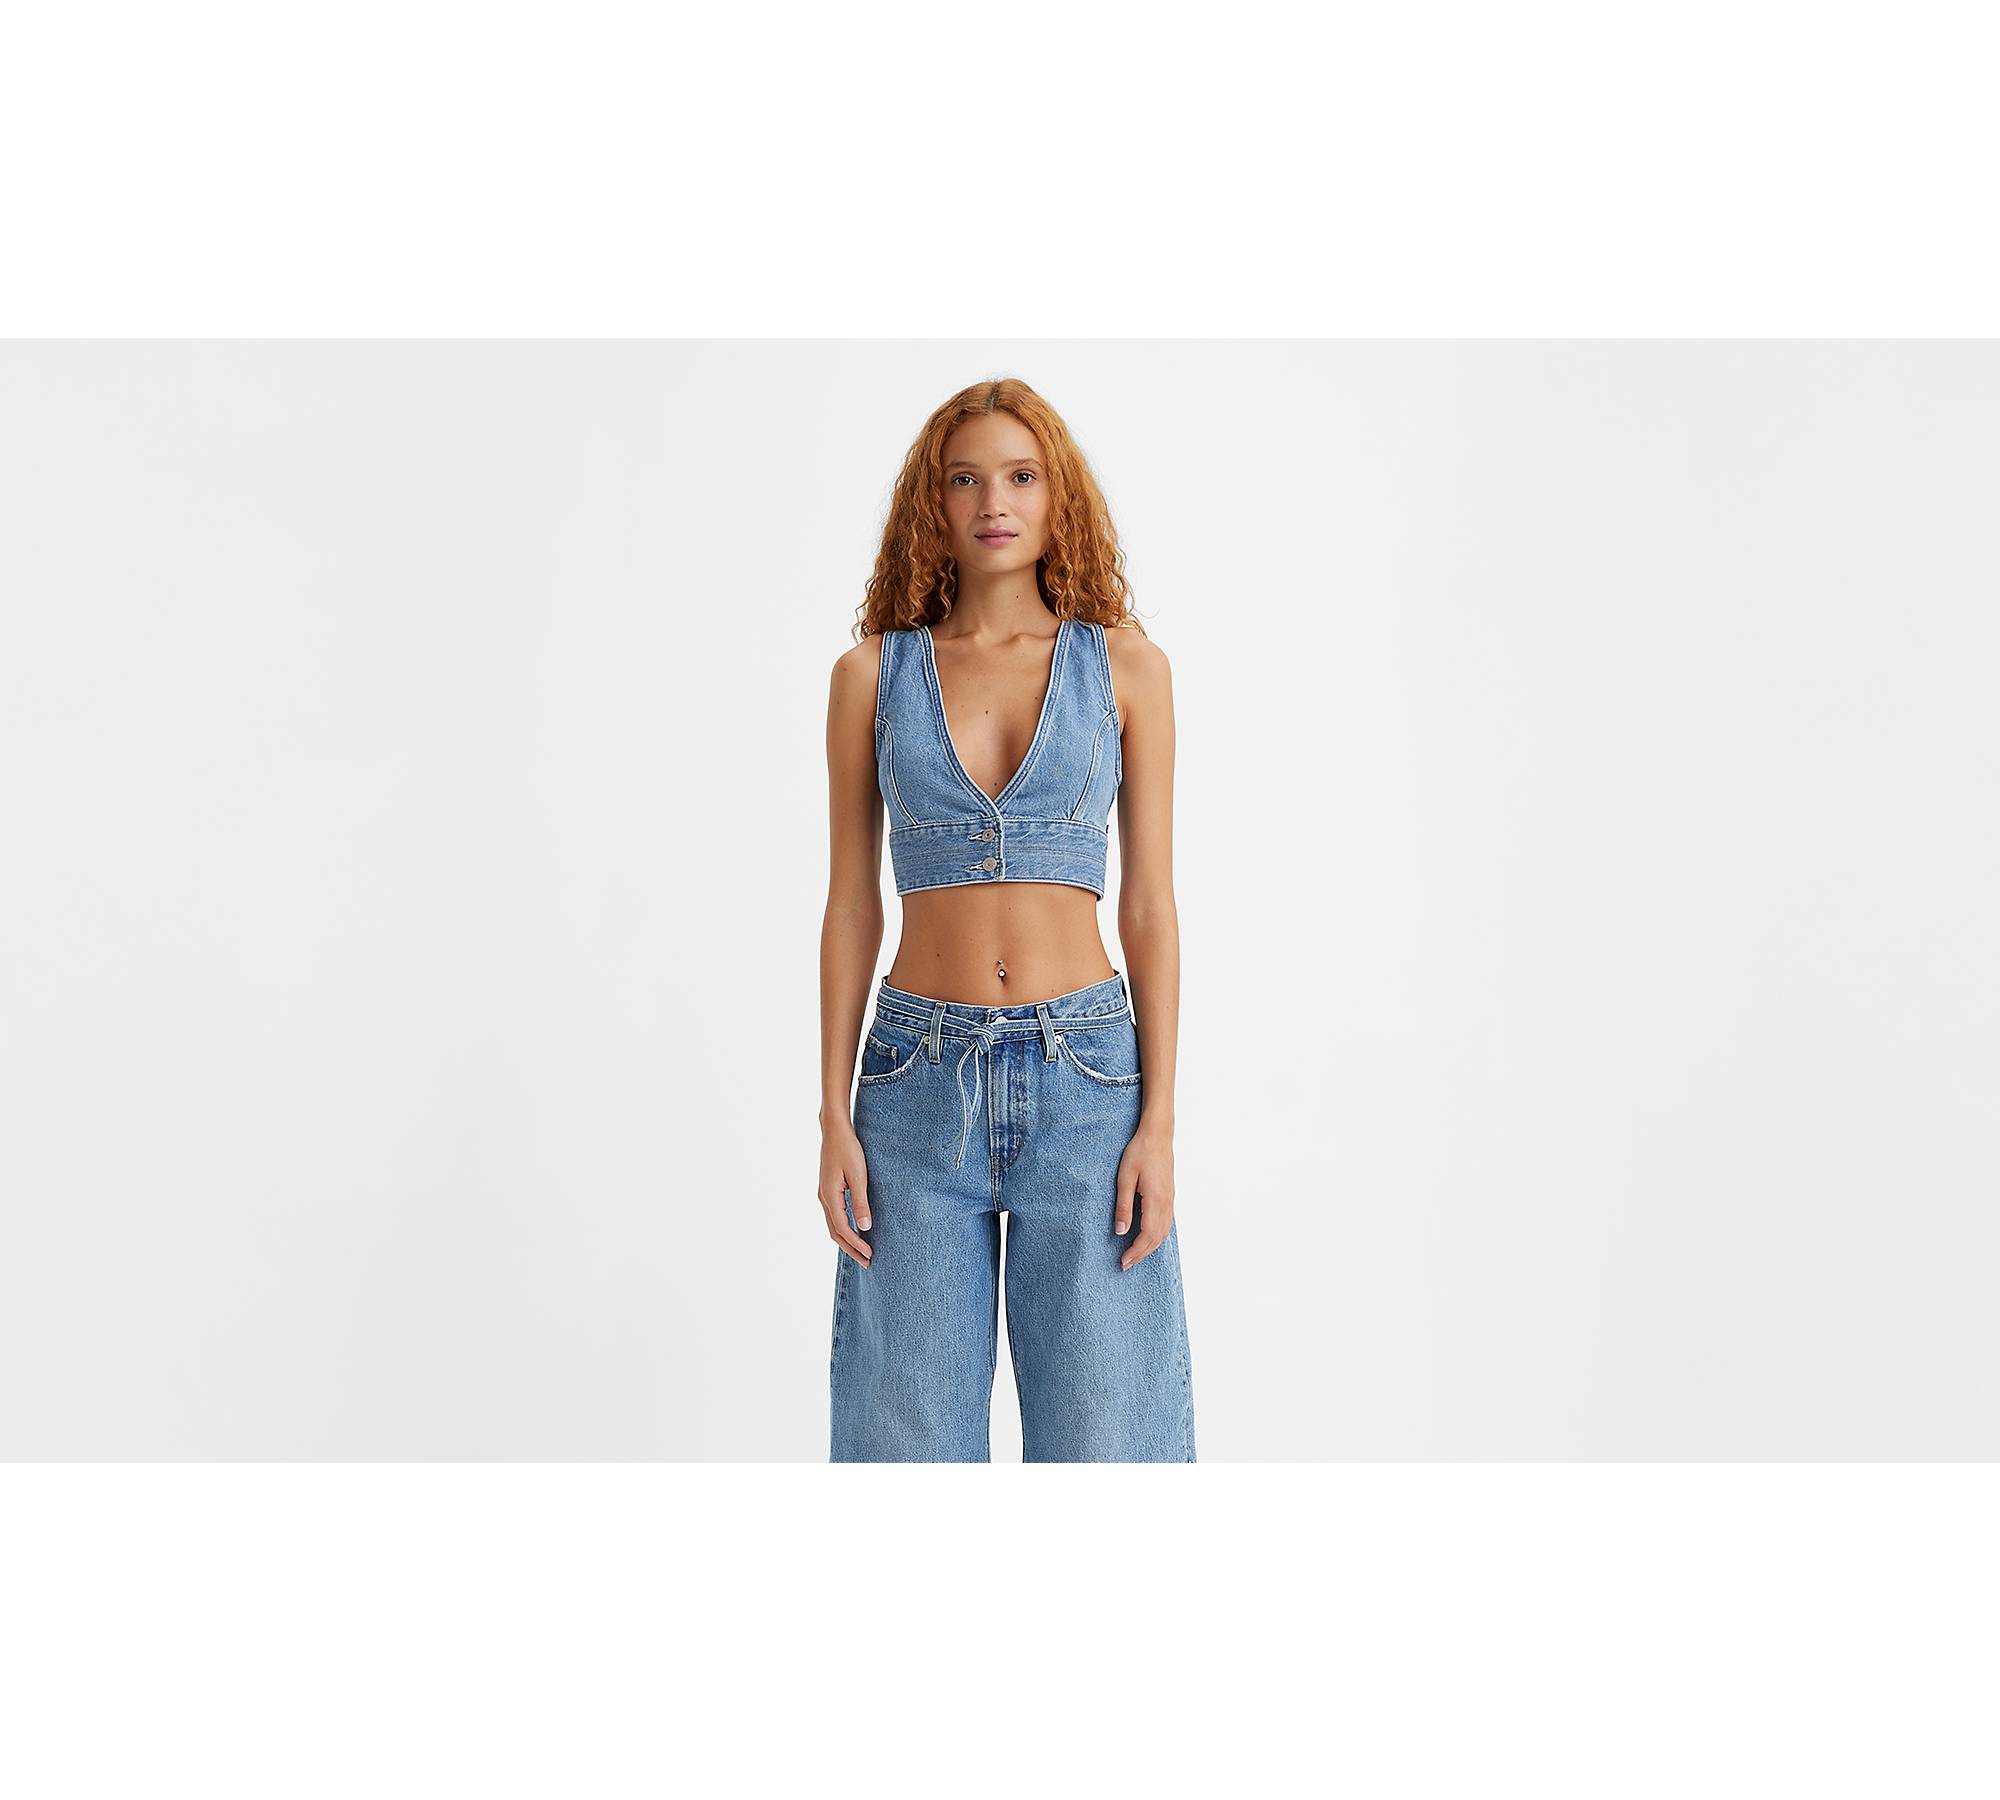 Search - Urban Outfitters  Crop top outfits, Denim fashion, Denim